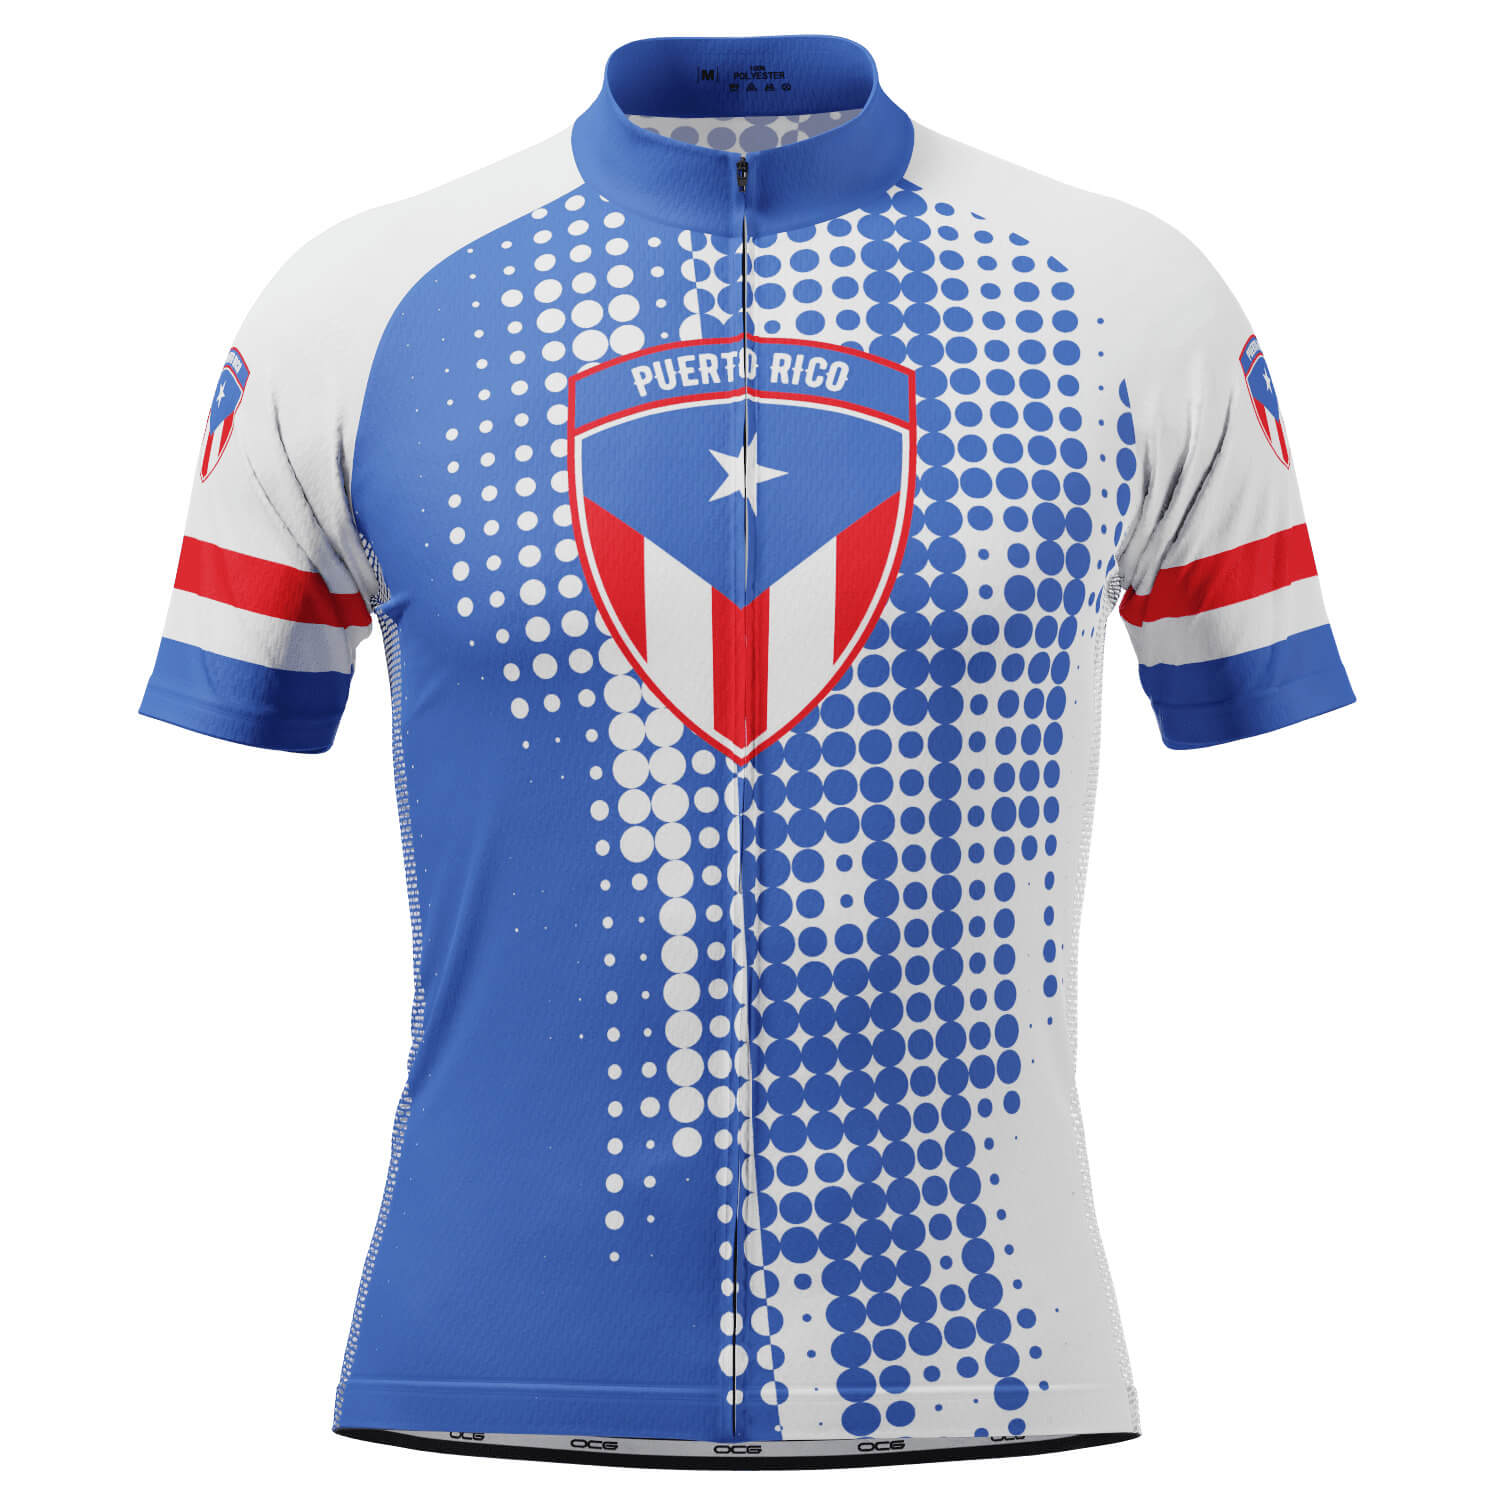 Men's Puerto Rico National Flag Short Sleeve Cycling Jersey